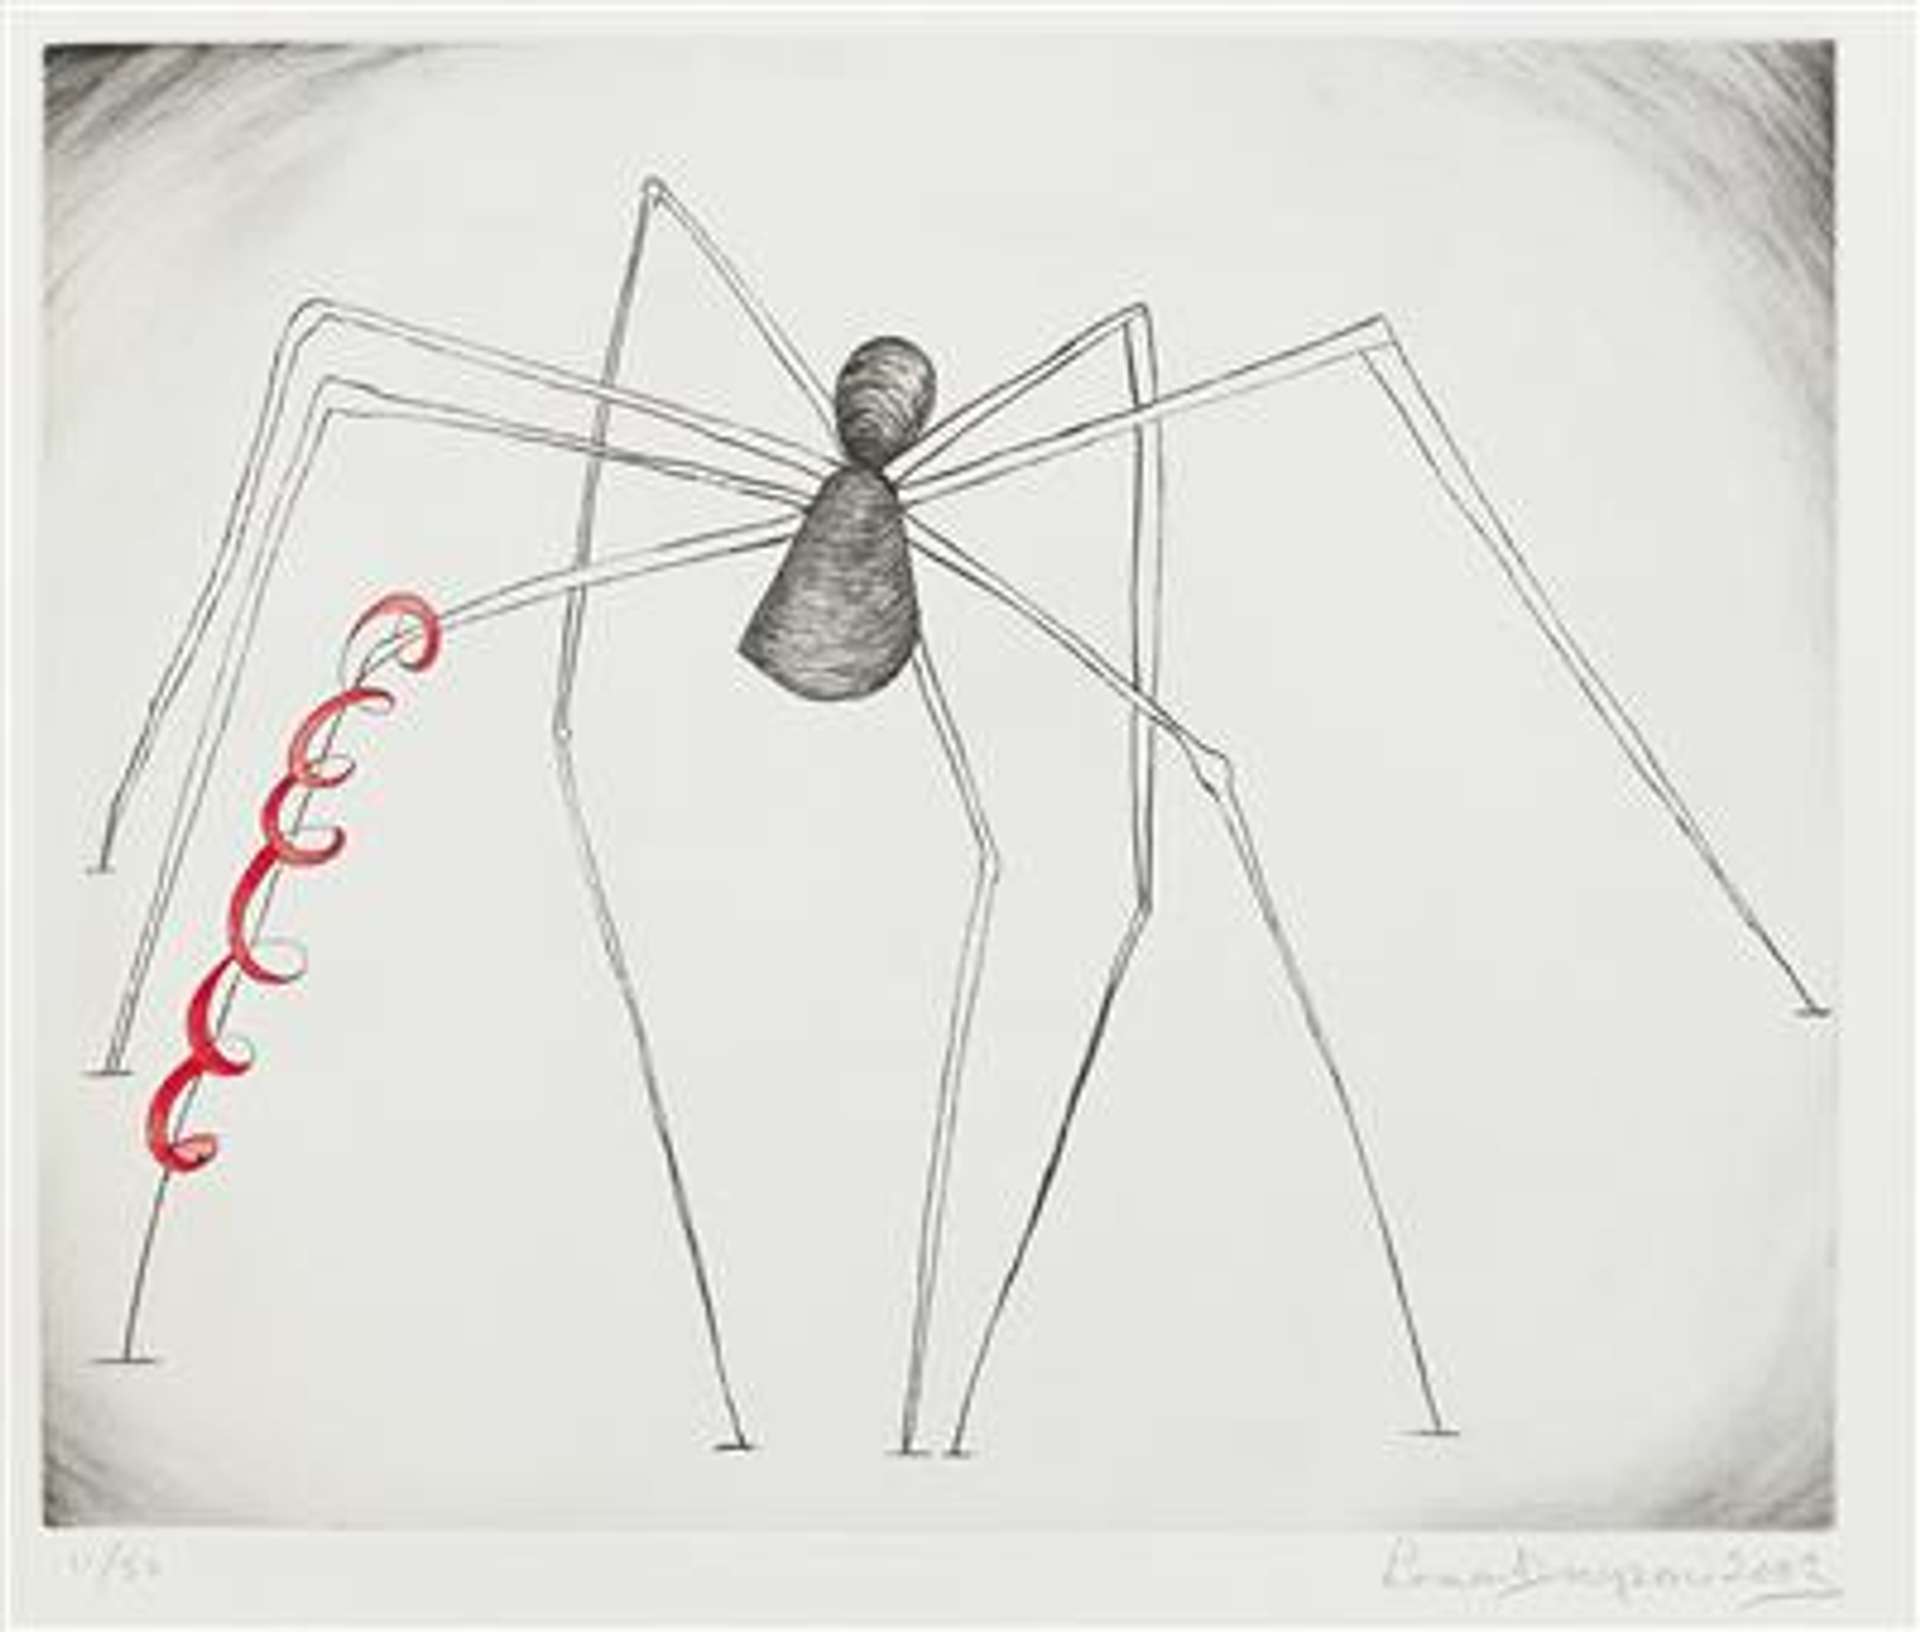 Louise Bourgeois' print Spider & Snake (2003). Etched image of a black and white spider with a red snake wrapped around one of its legs.